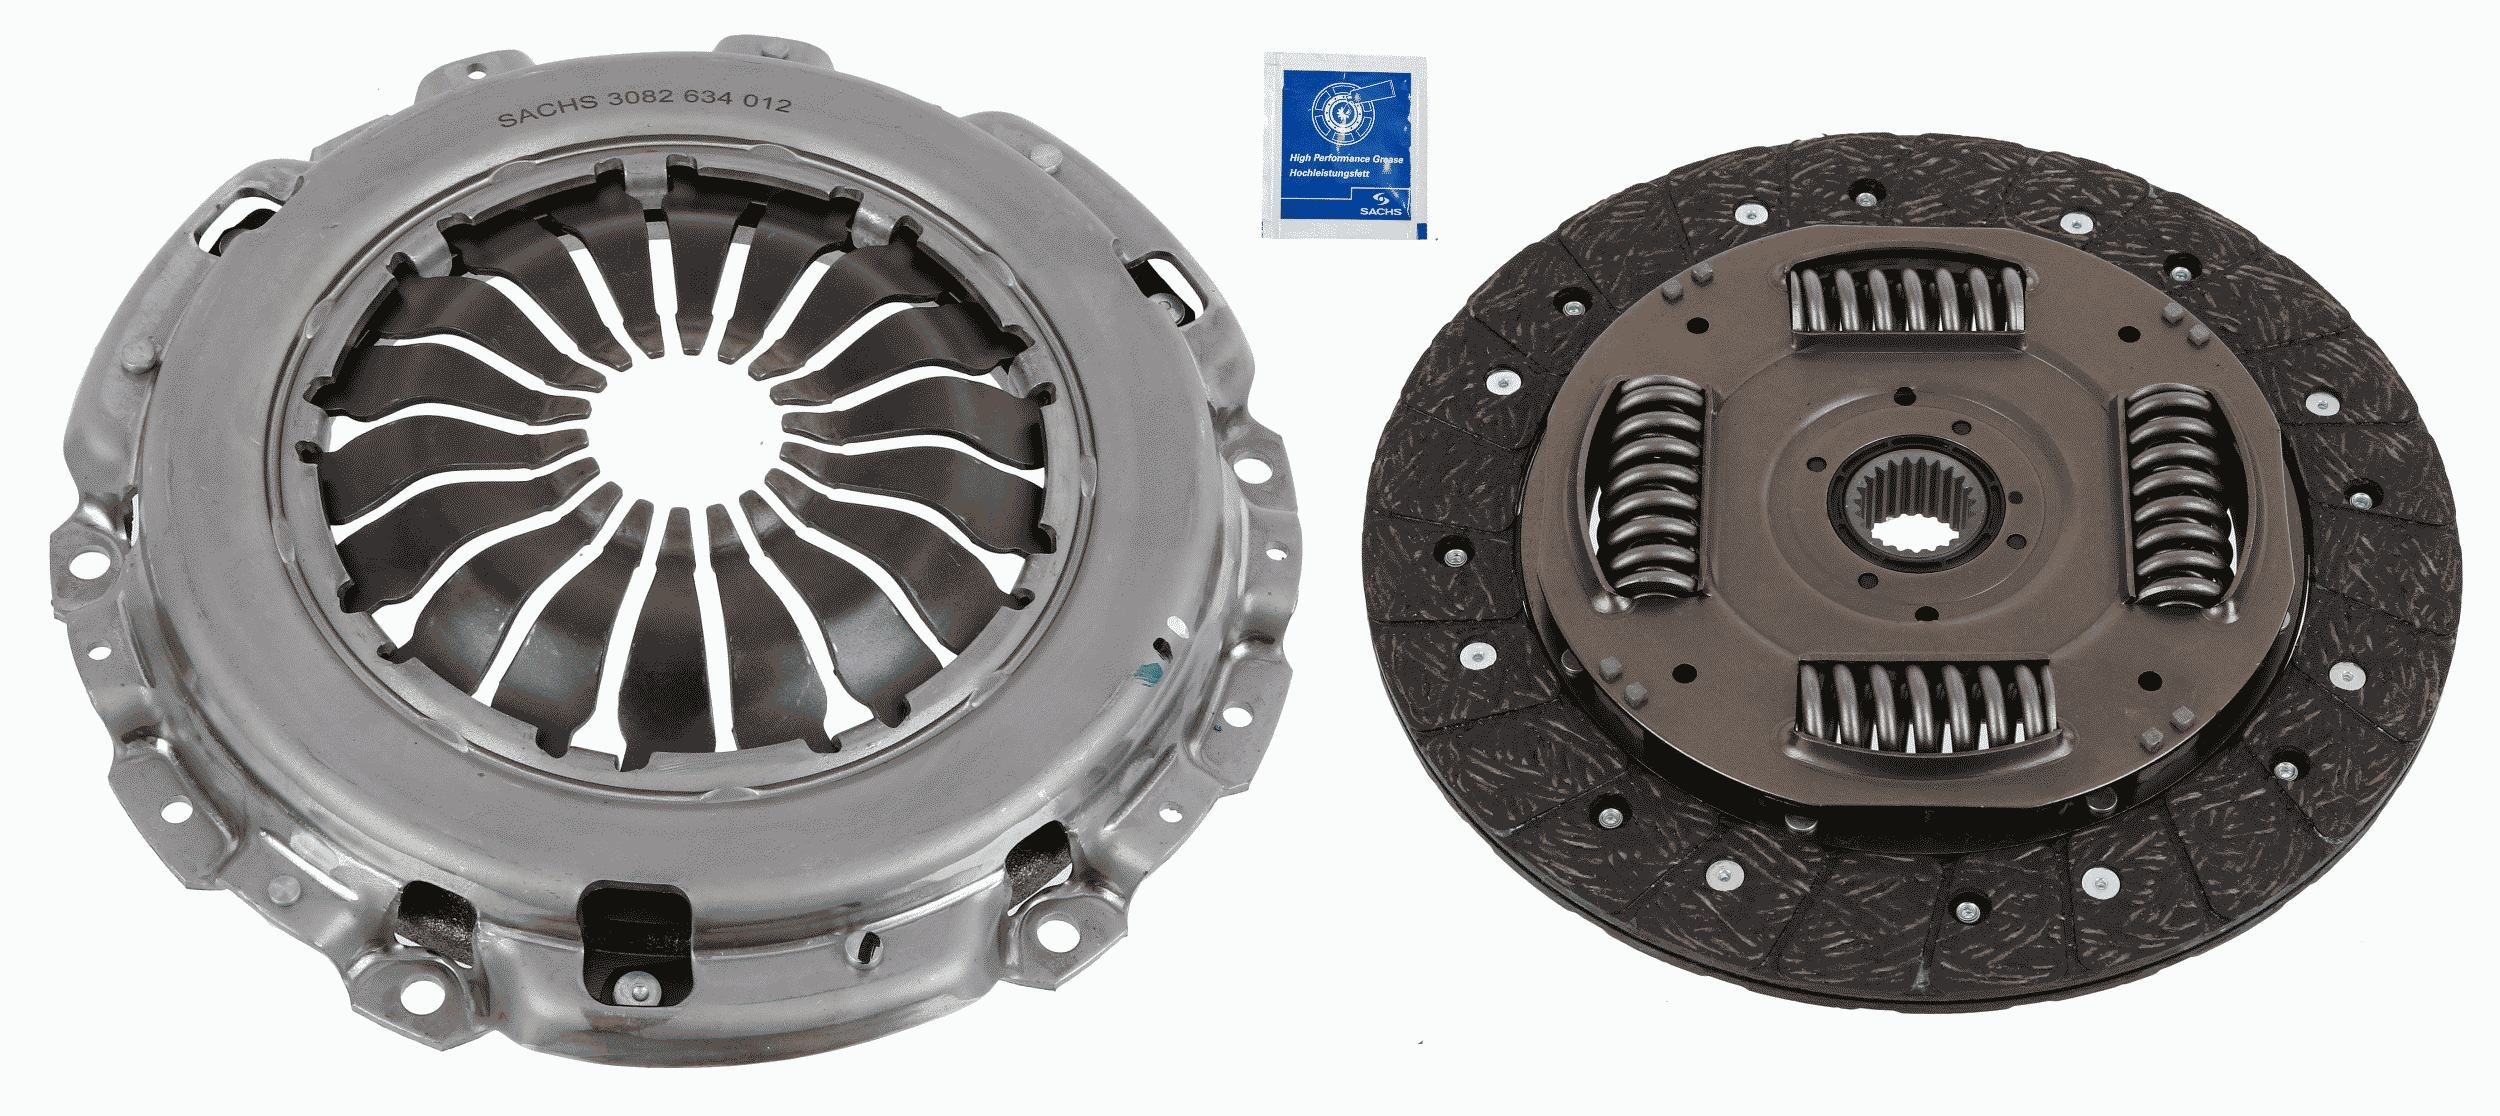 OEM-quality SACHS 3000 951 612 Clutch replacement kit